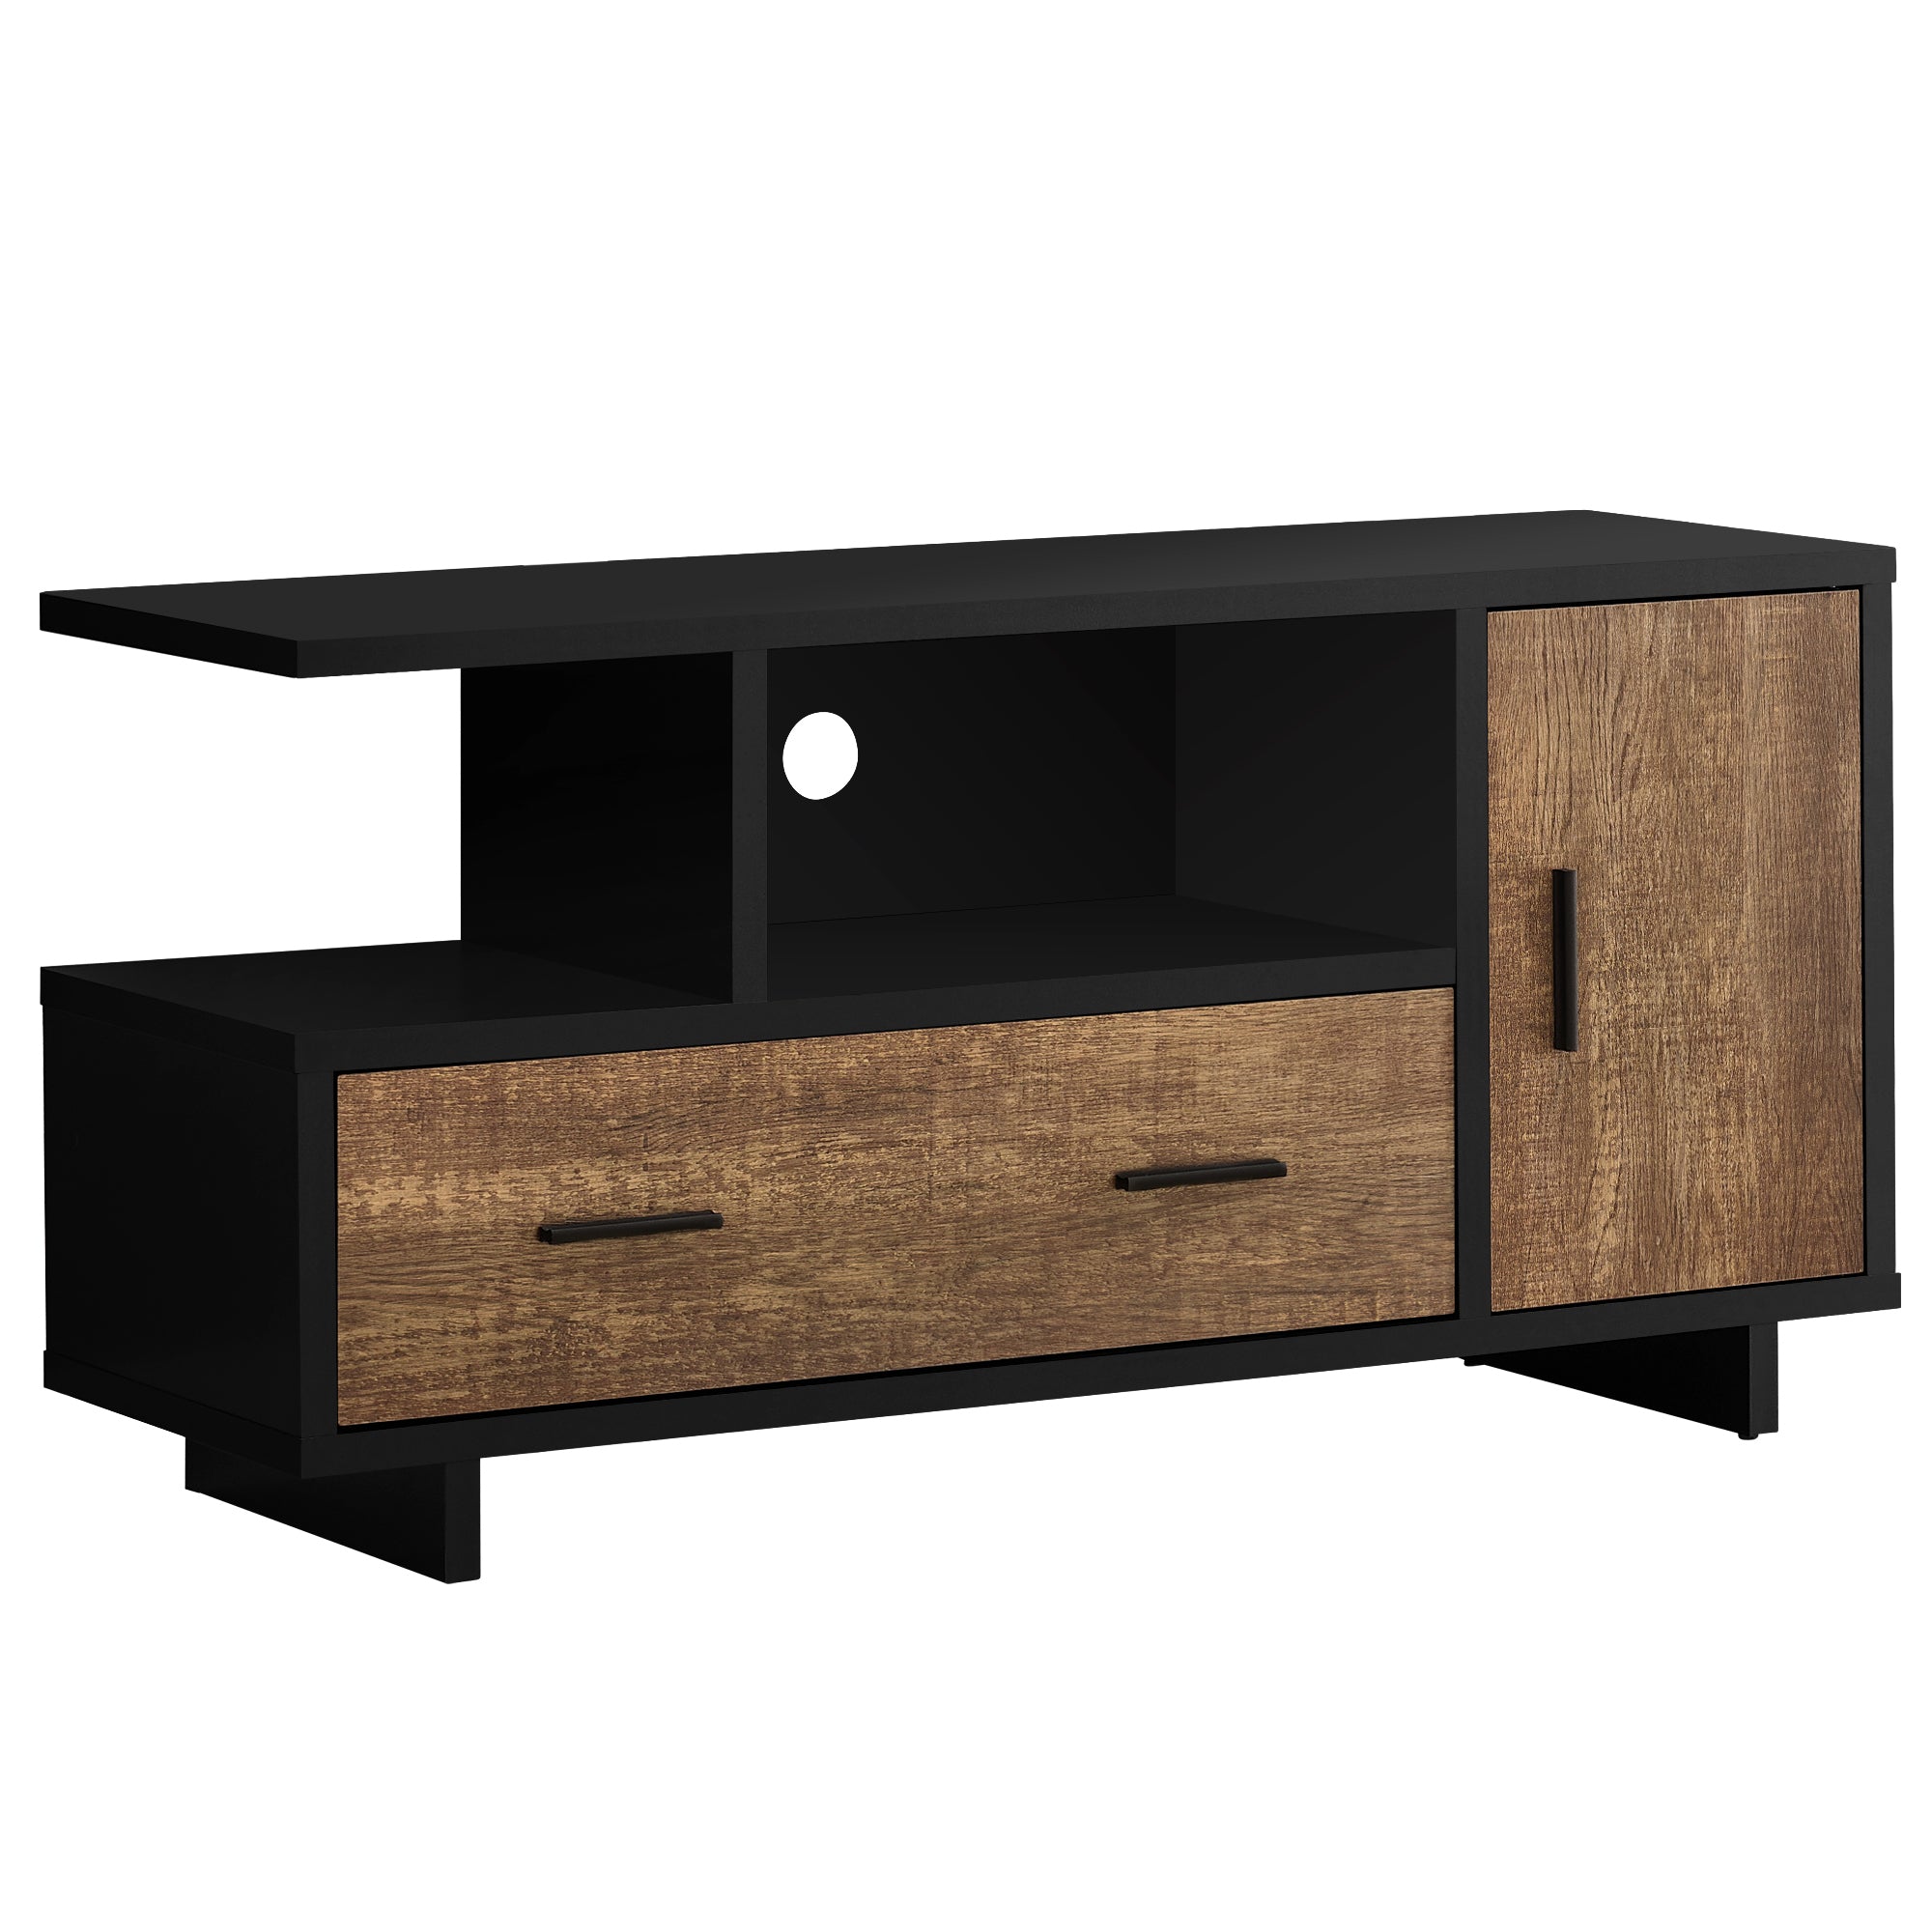 MN-362803    Tv Stand, 48 Inch, Console, Media Entertainment Center, Storage Cabinet, Living Room, Bedroom, Laminate, Black, Brown Reclaimed Wood Look, Contemporary, Modern